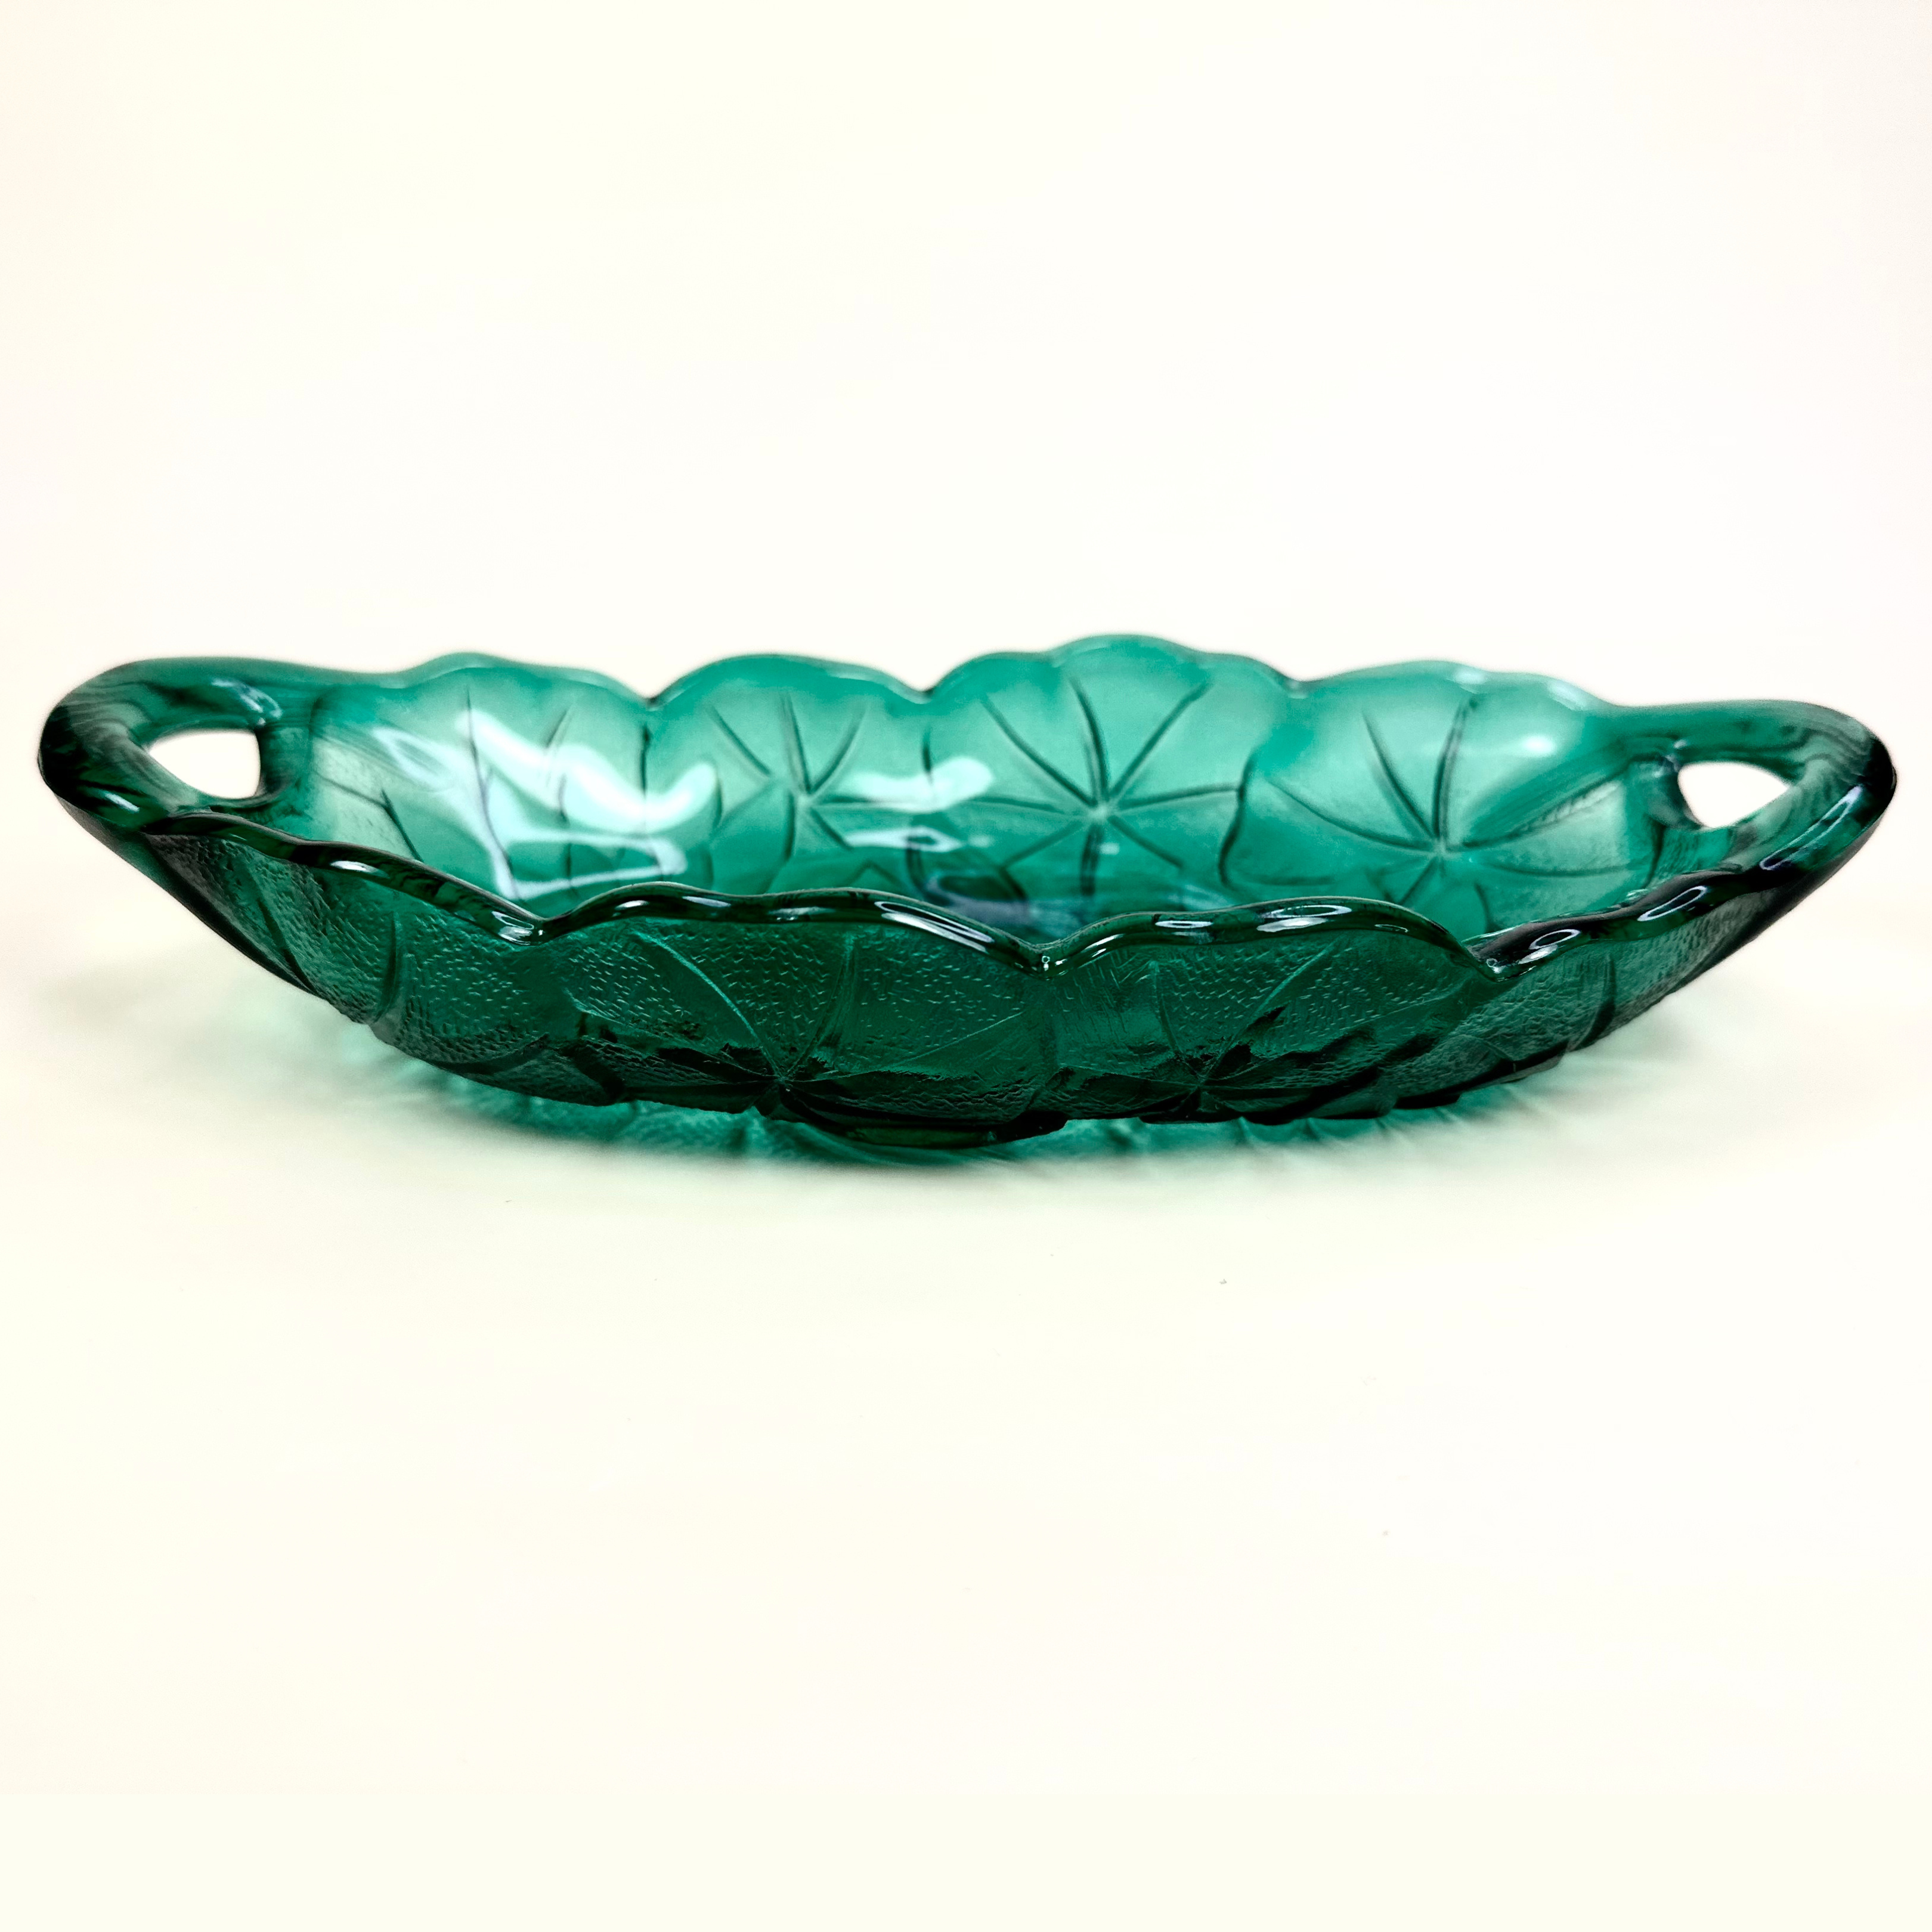 Emerald Green Floral Catchall